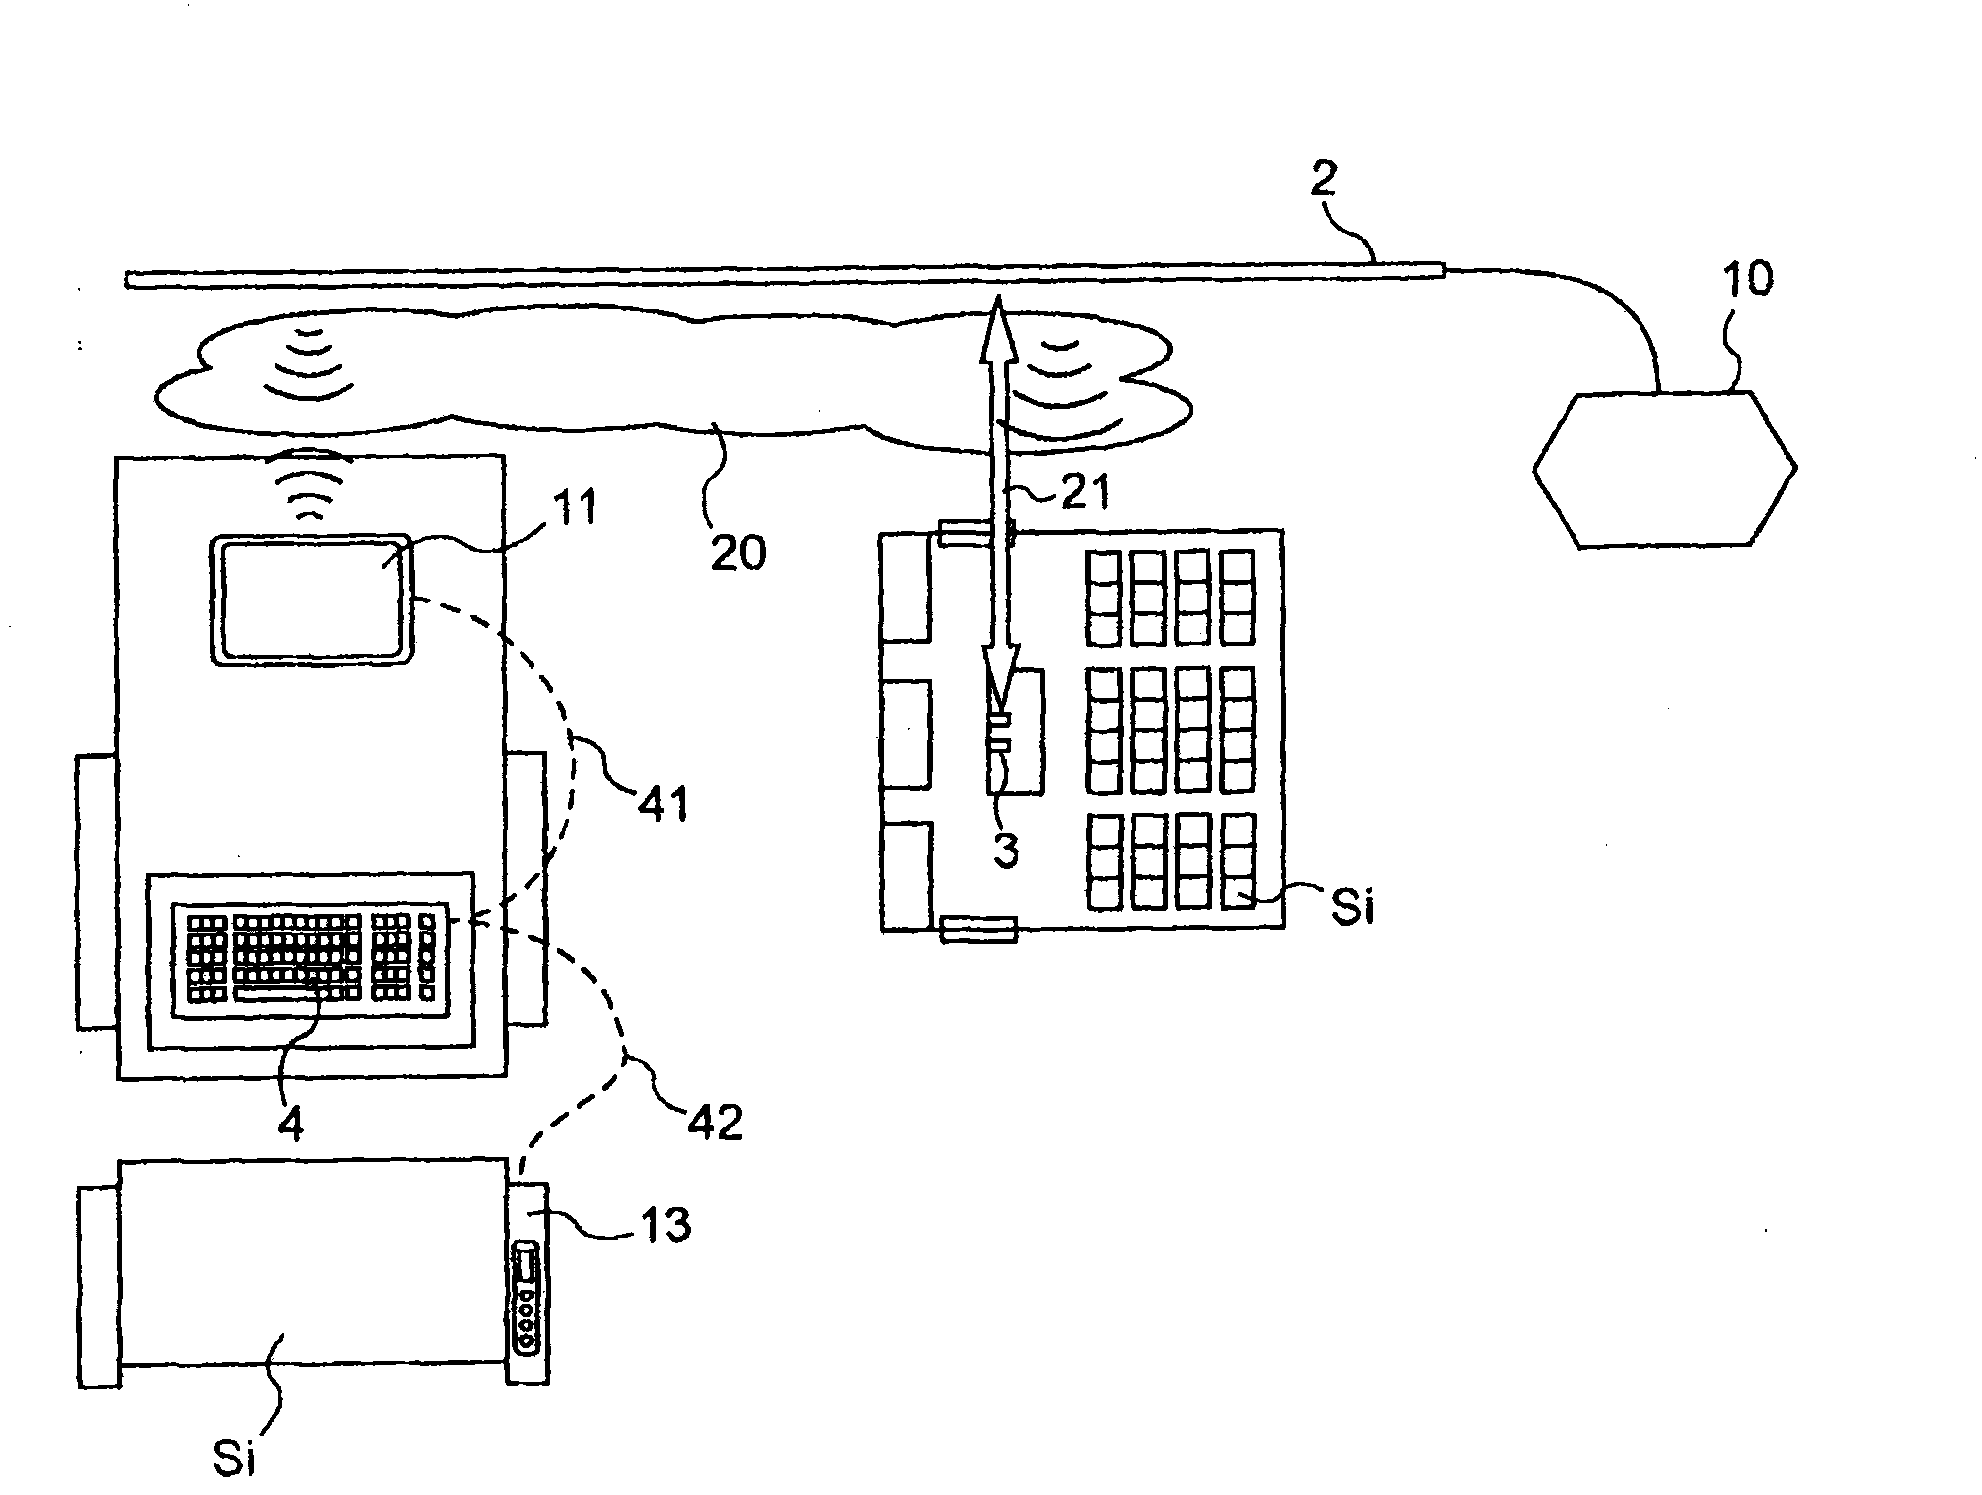 System and method for accessing a personal computer device onboard an aircraft and aircraft equipped with such system